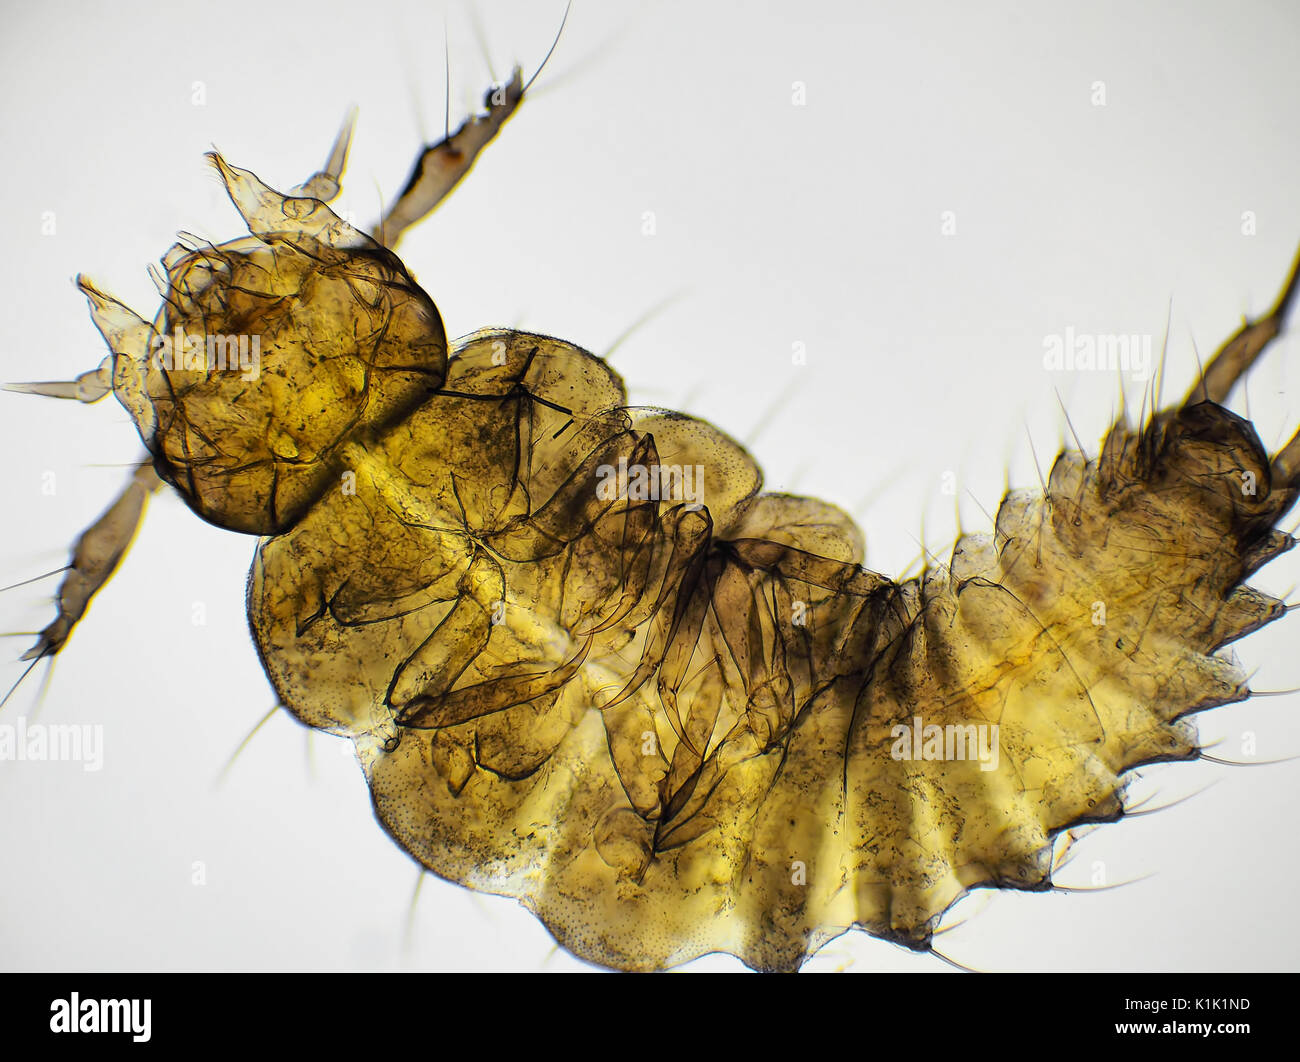 Beetle larva, bright field light micrograph, 60x magnification when printed 10cm wide Stock Photo